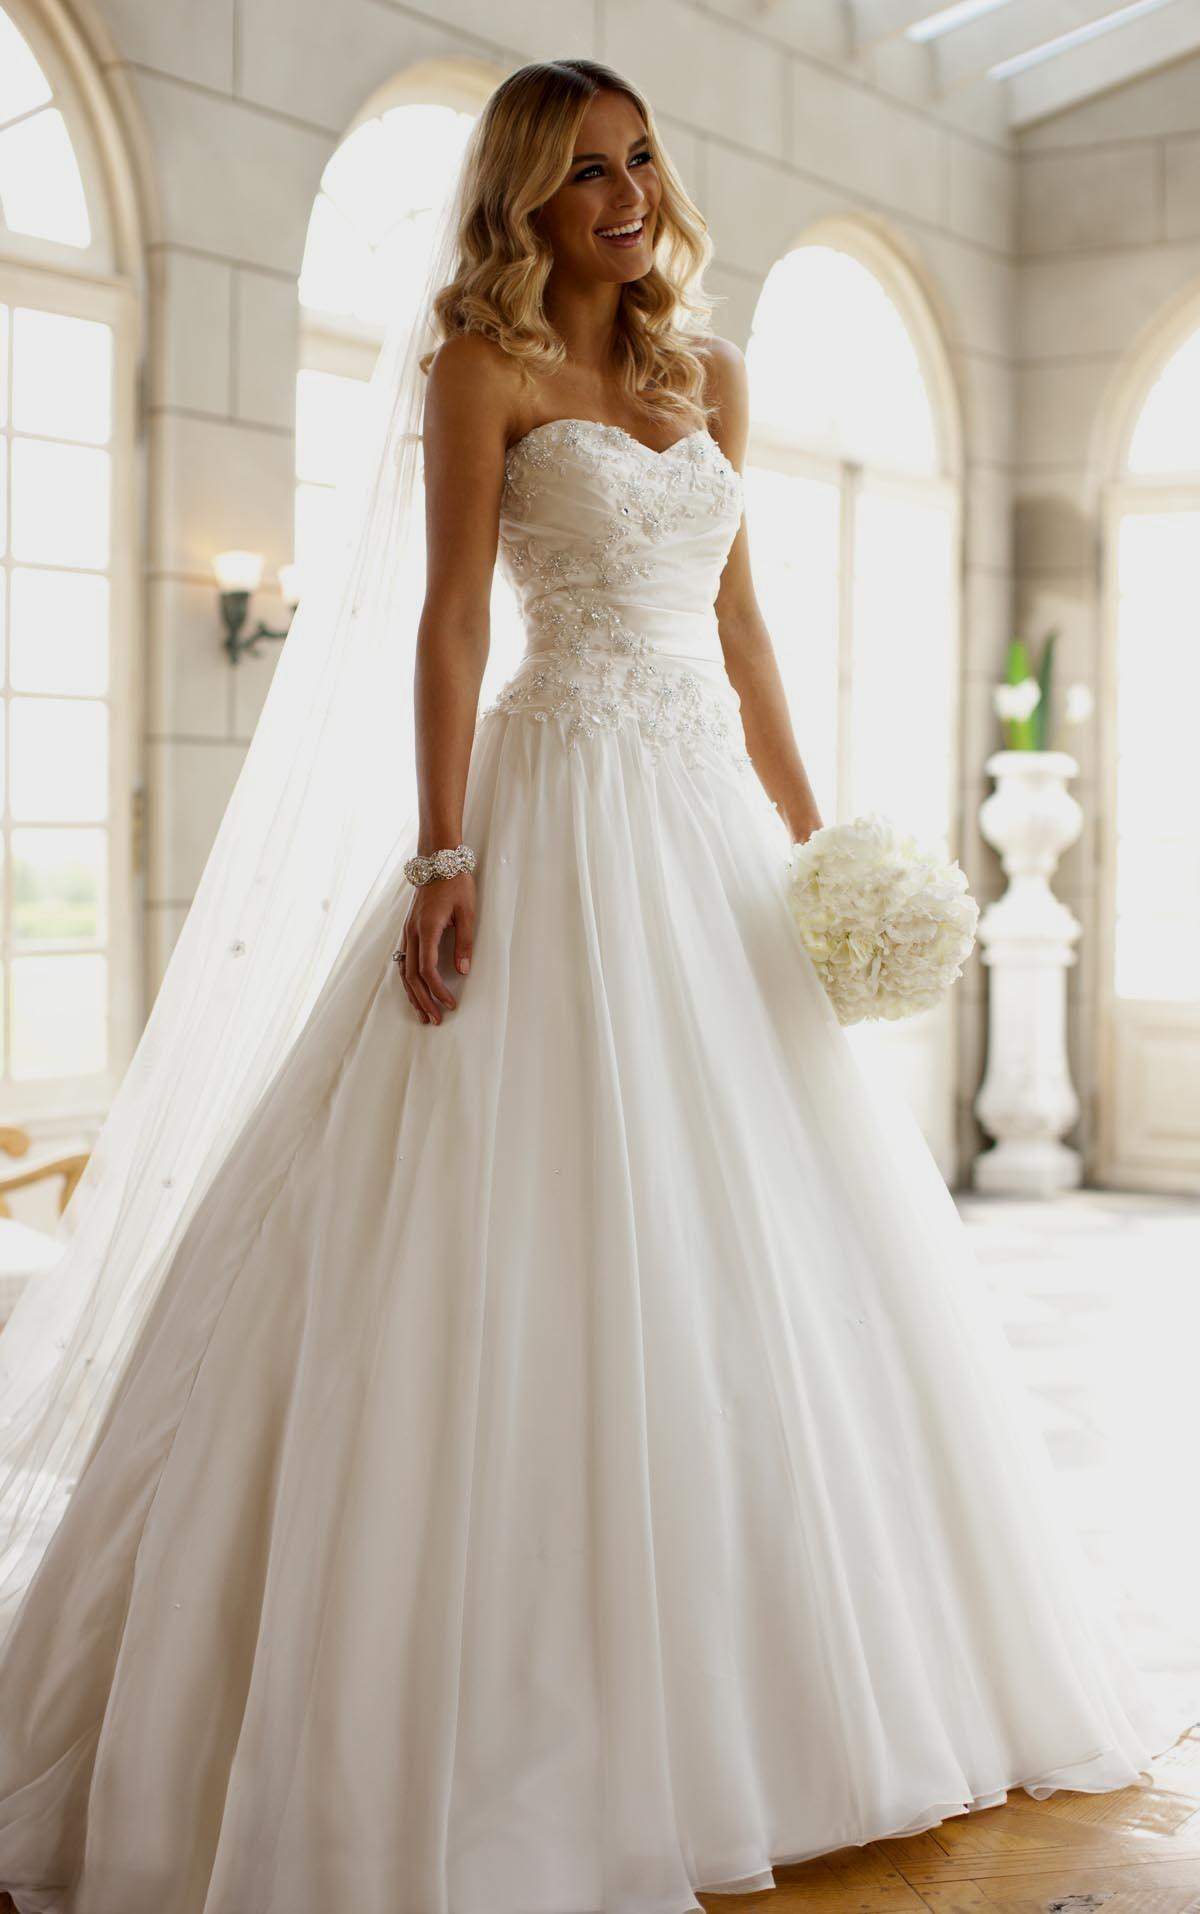 Strapless Wedding Gown
 Who Can Wear Strapless Wedding Dresses